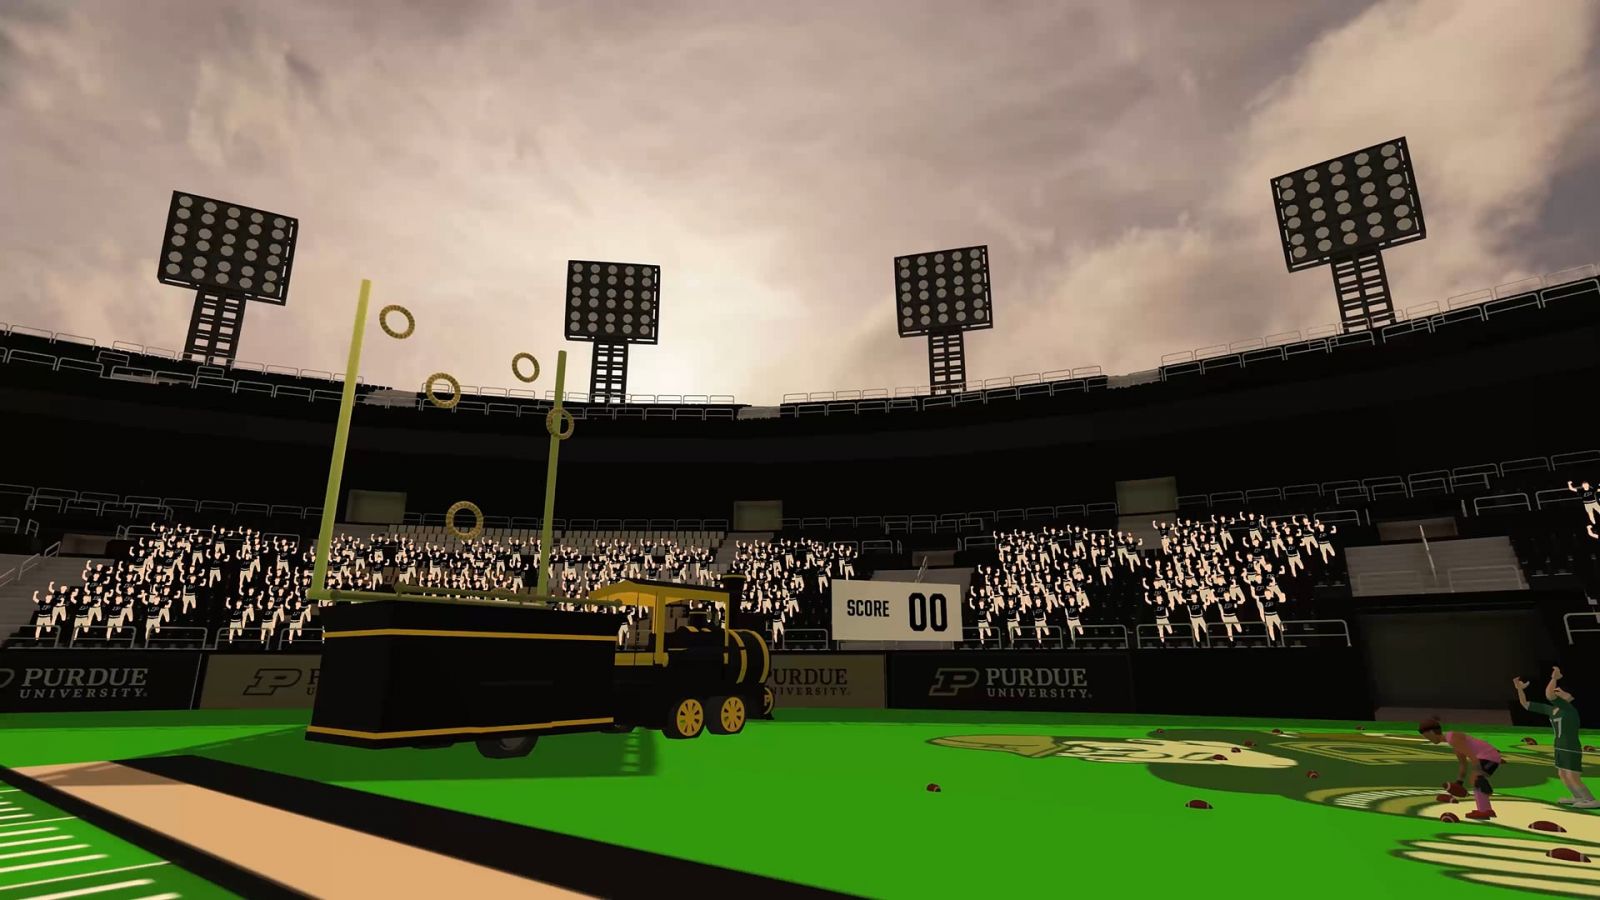 The in-game version of the Boilermaker Special, as it appears within the interactive Ross-Ade Stadium designed by Design Futures graduate students. (Courtesy of Iconic Engine)